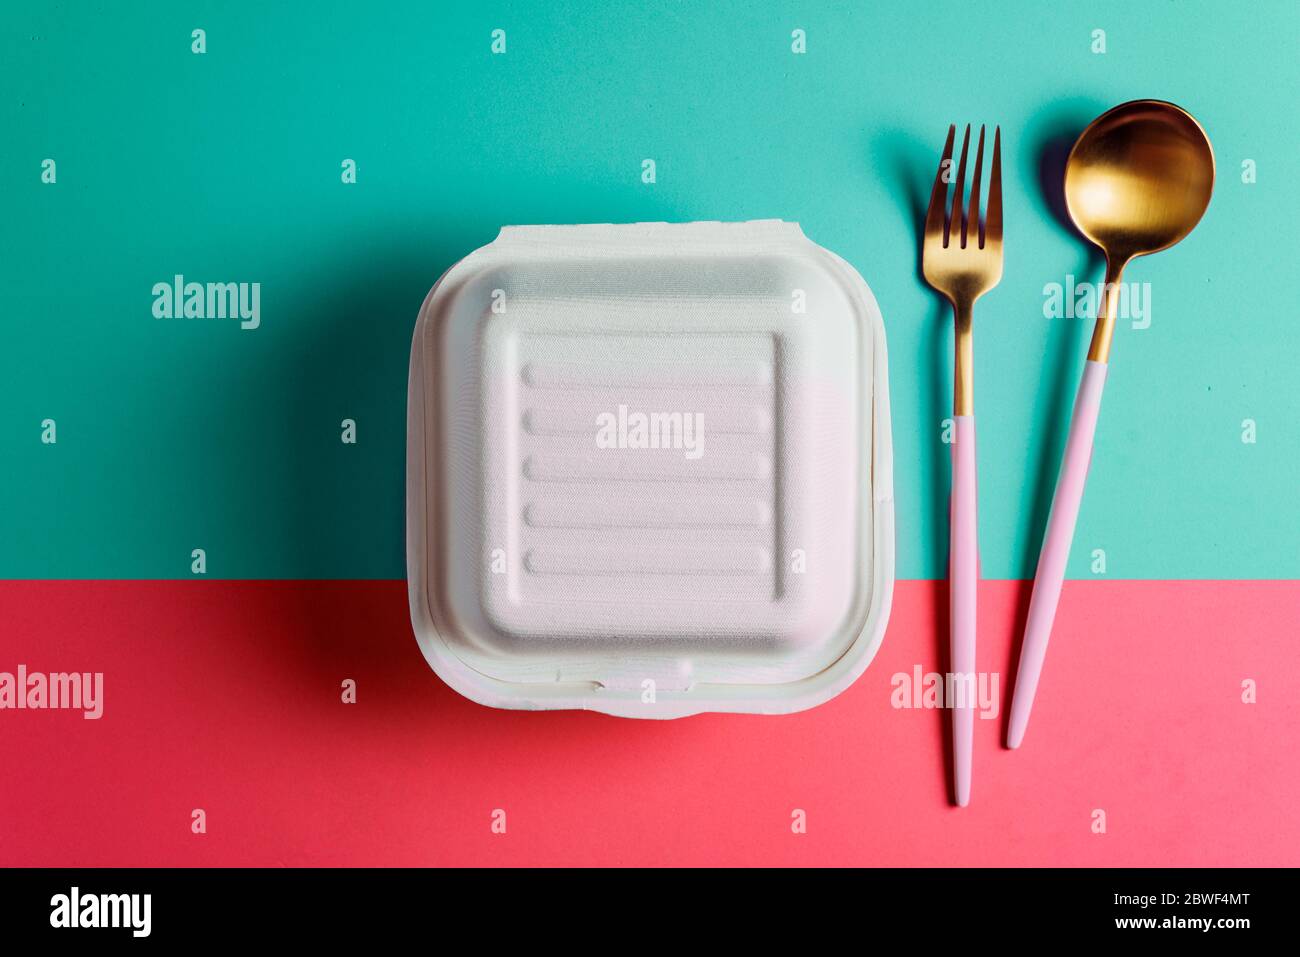 Healthy food concept: white burguer packaging closed with golden fork and spoon, in cardboard lunch box to take to the office on pink surface Stock Photo